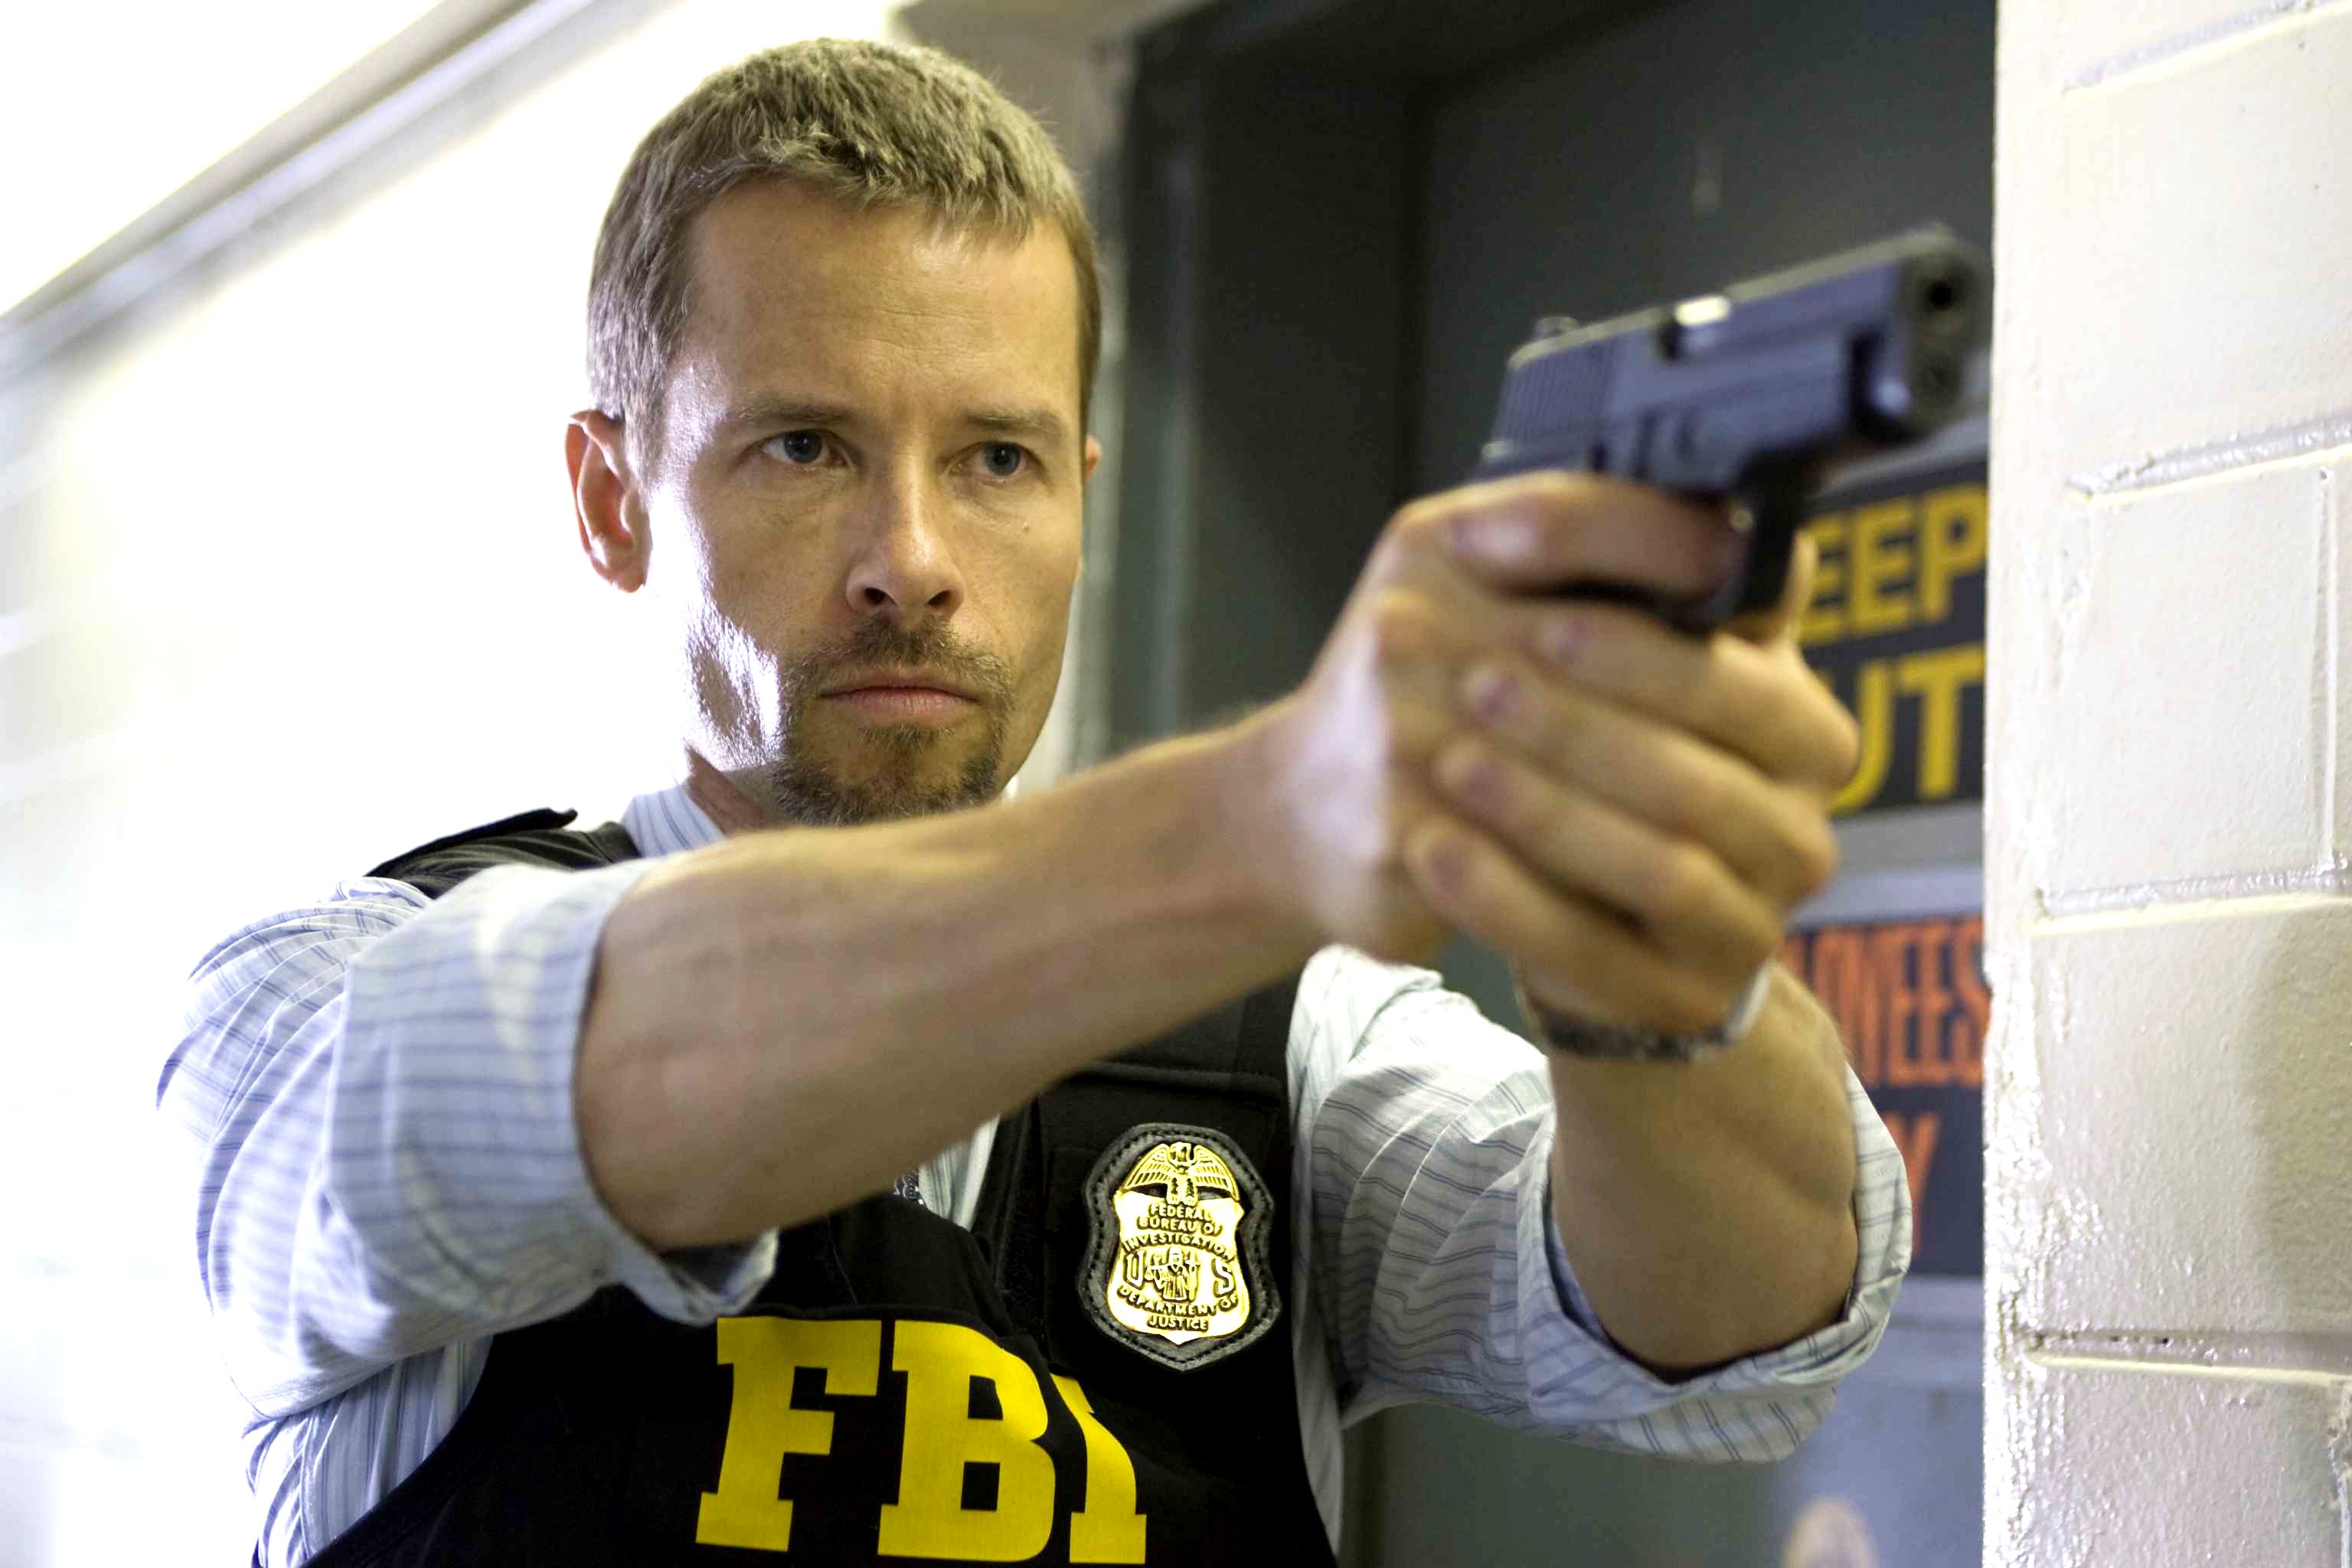 Guy Pearce stars as Roy Clayton in Overture Films' Traitor (2008). Photo credit by Rafy.